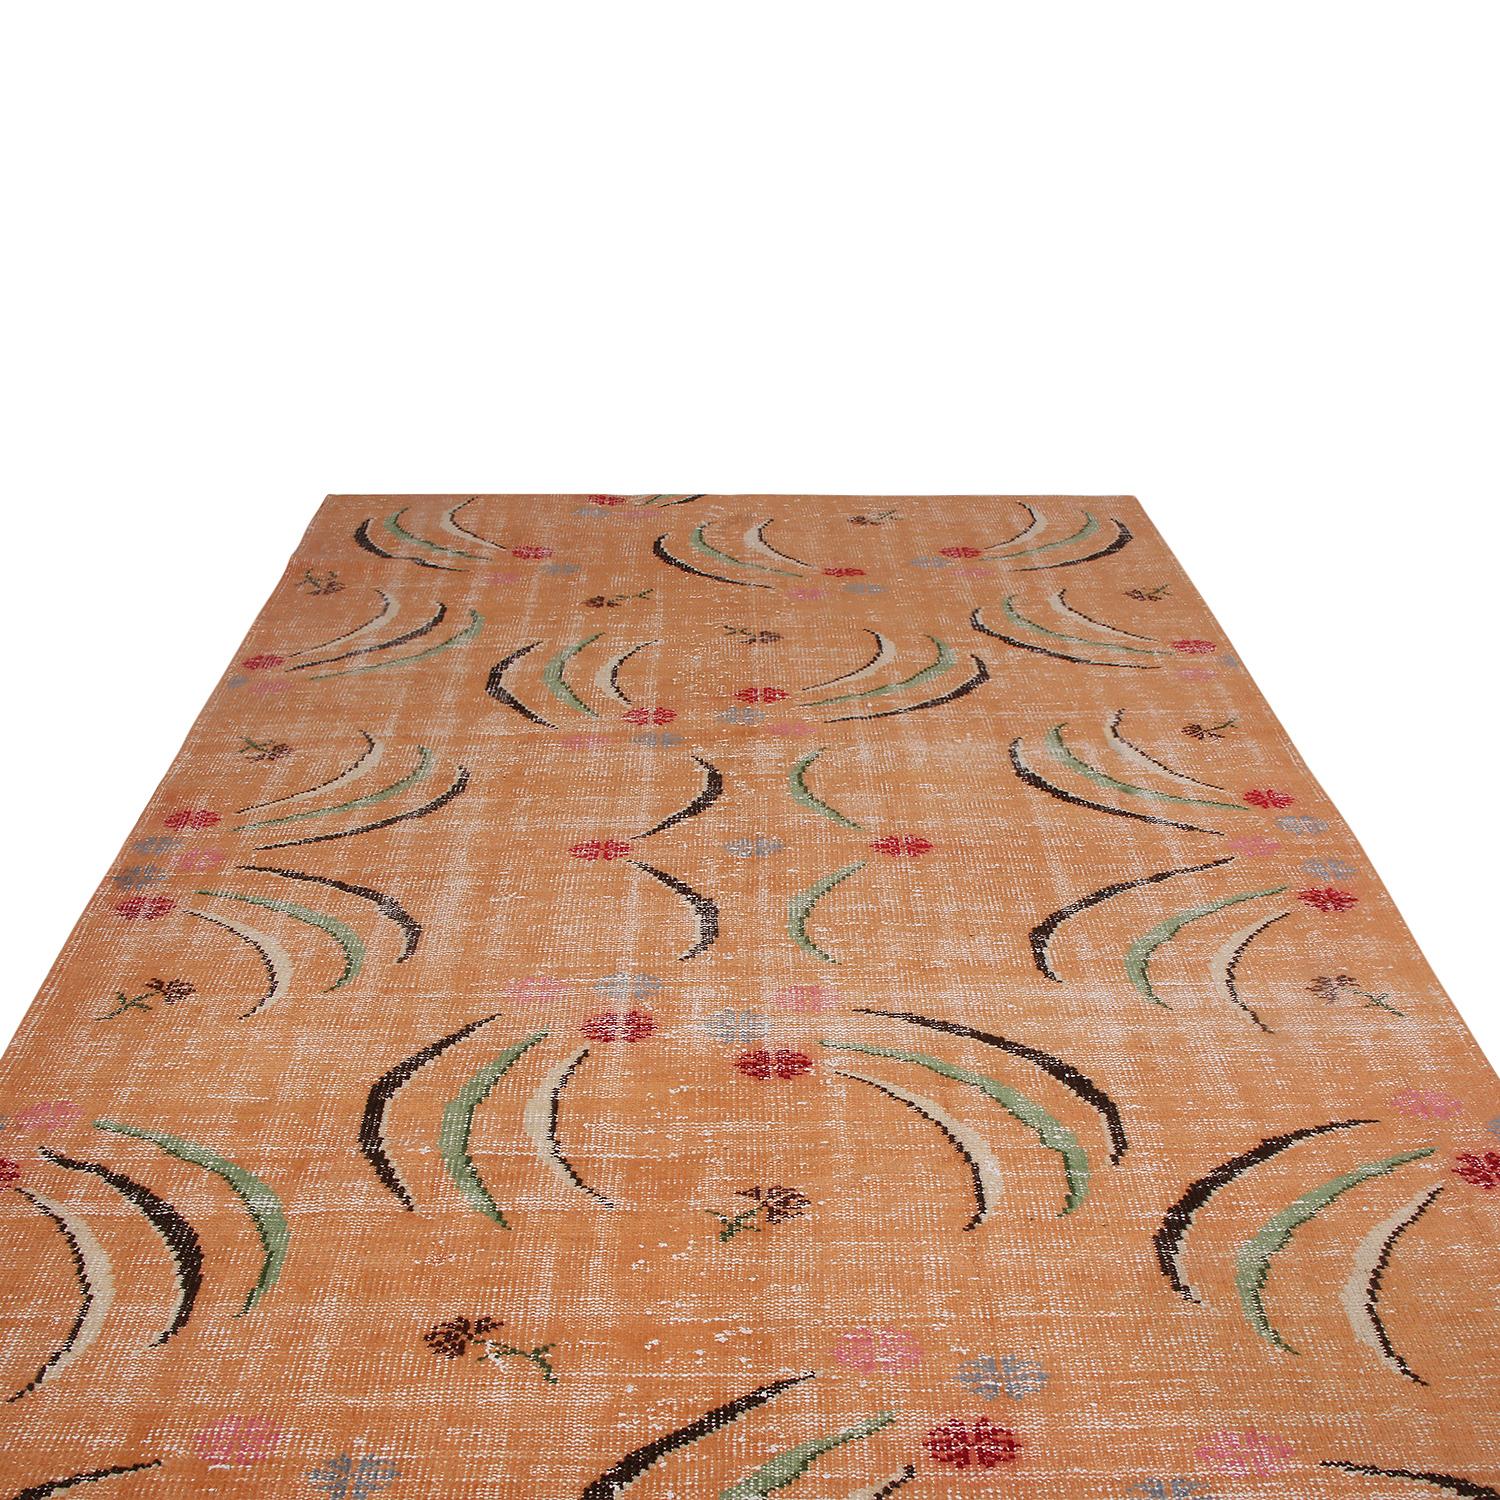 Hand knotted in Turkey originating between 1960-1970, this vintage midcentury runner is the latest to join our midcentury Pasha collection, celebrating Turkish icon and multidisciplinary designer Zeki Müren with Josh’s hand picked favorites from